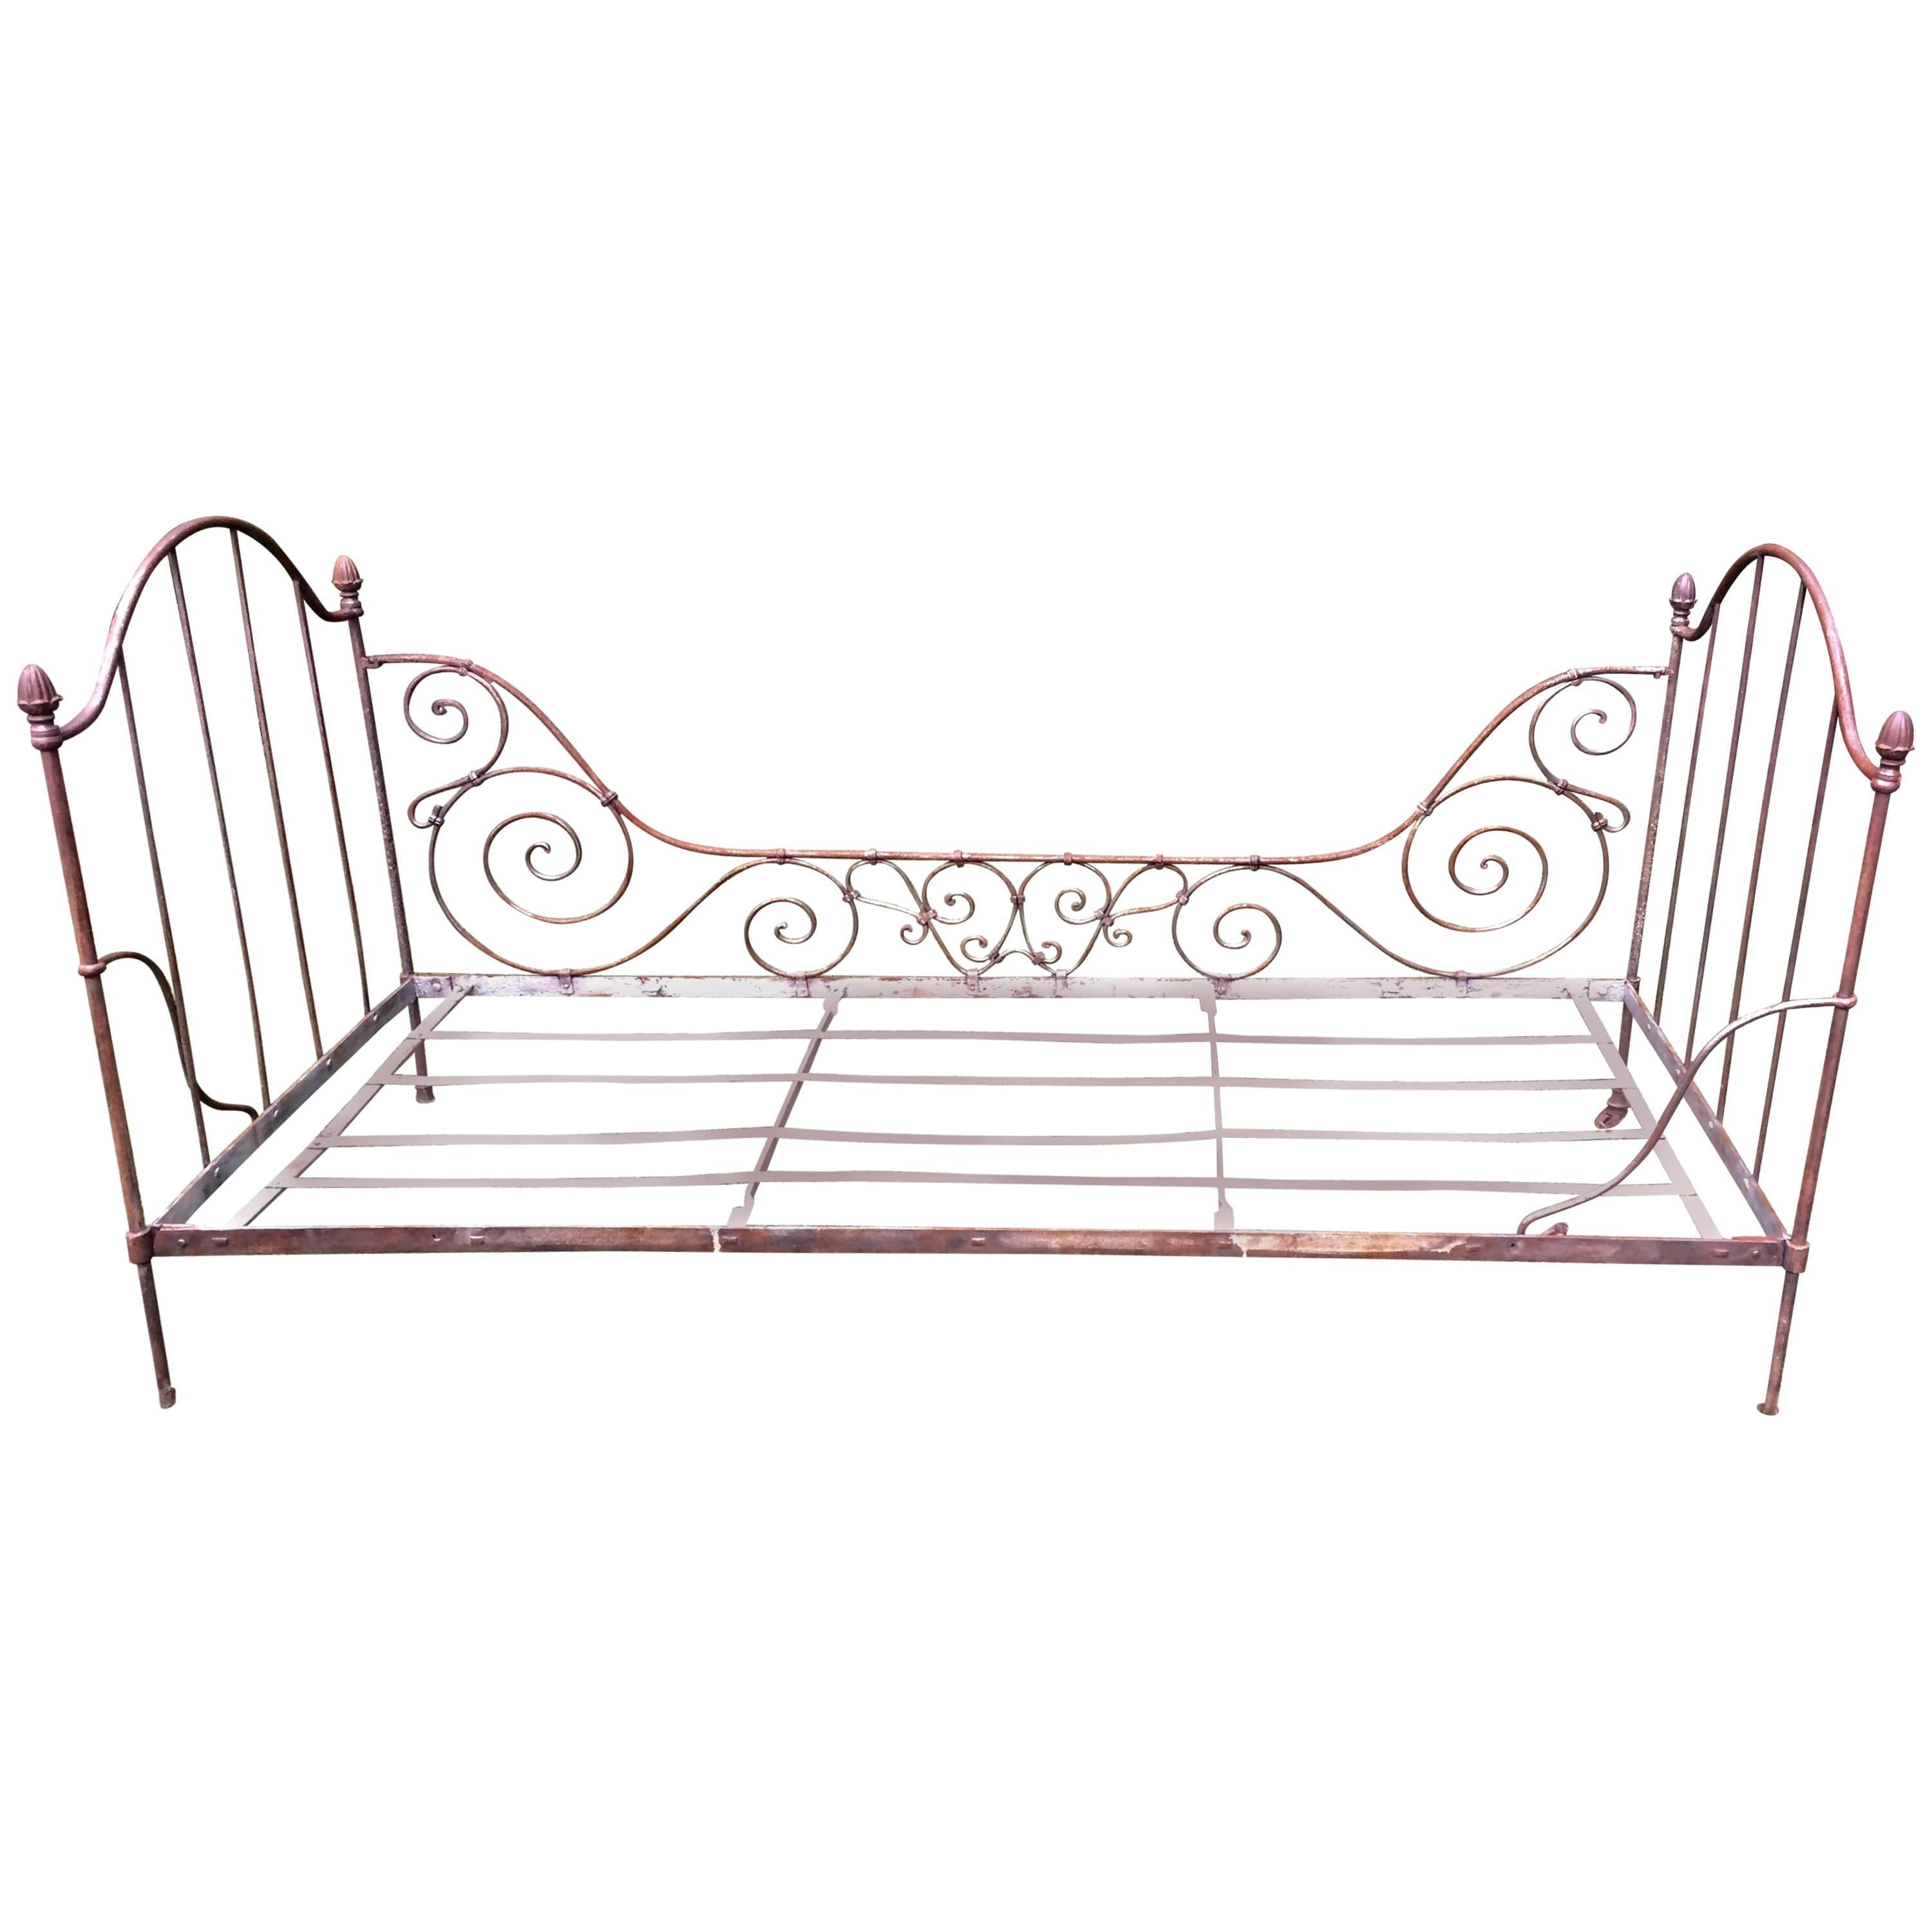 Charming Antique French Iron Daybed